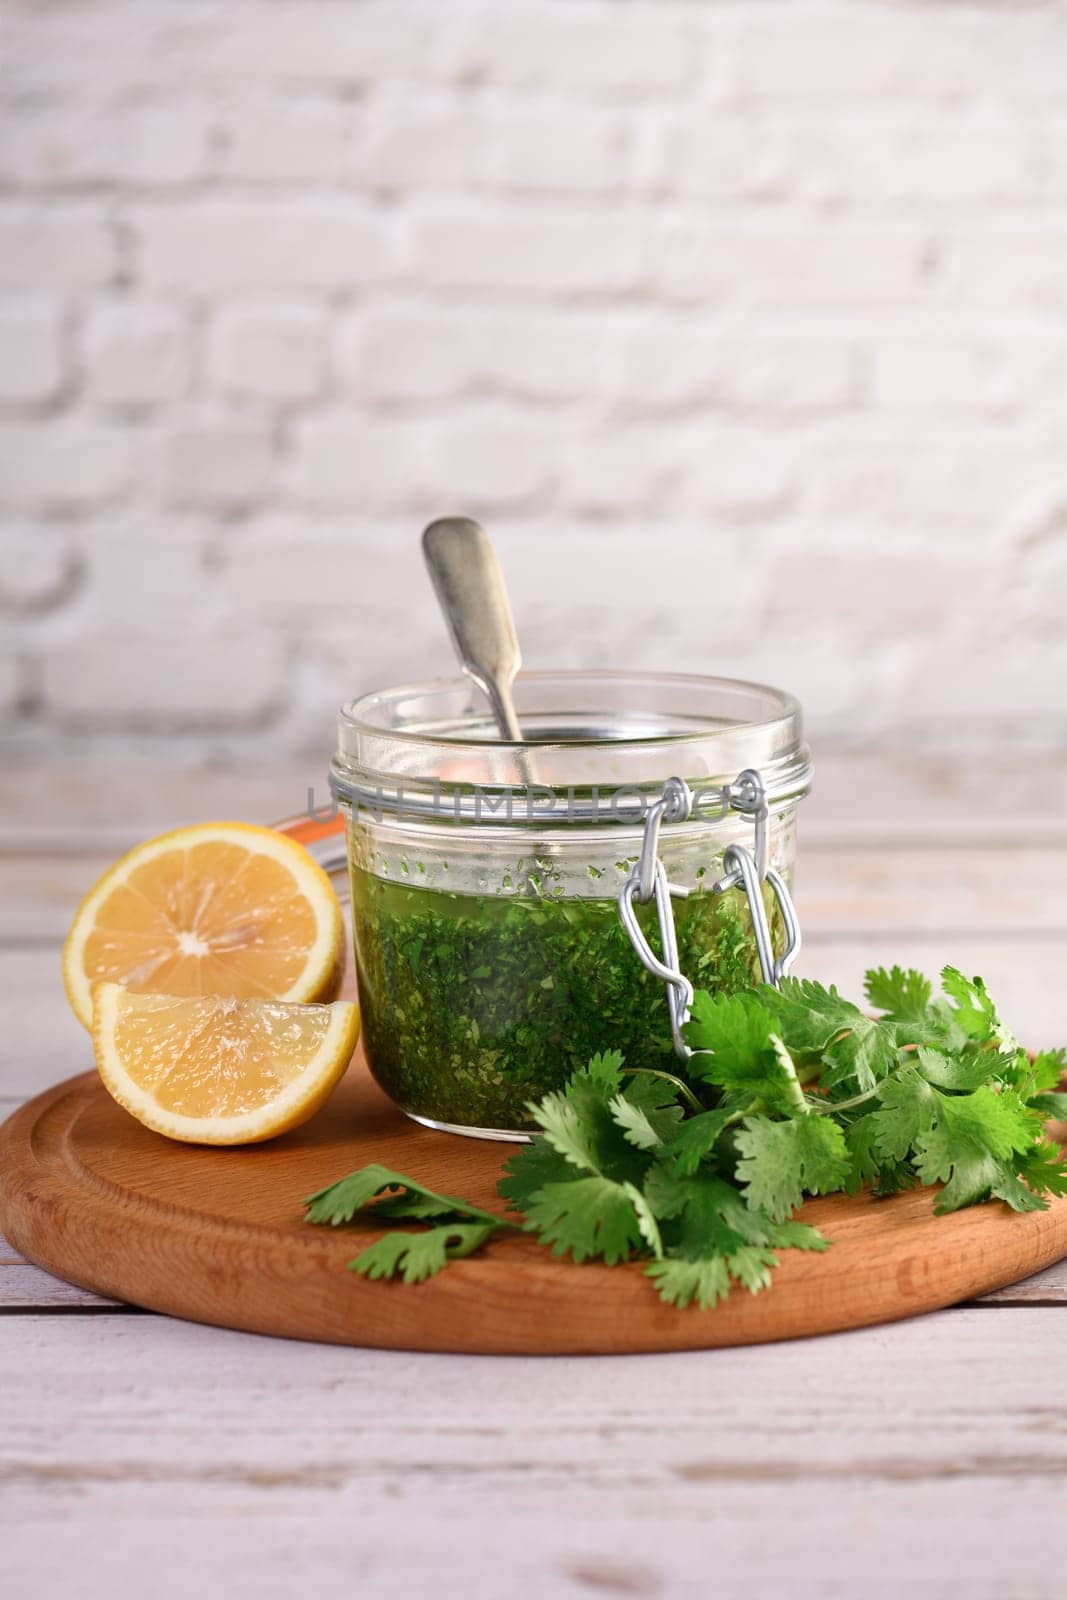 Green sauce, cilantro seasoning for salad dressing by Apolonia